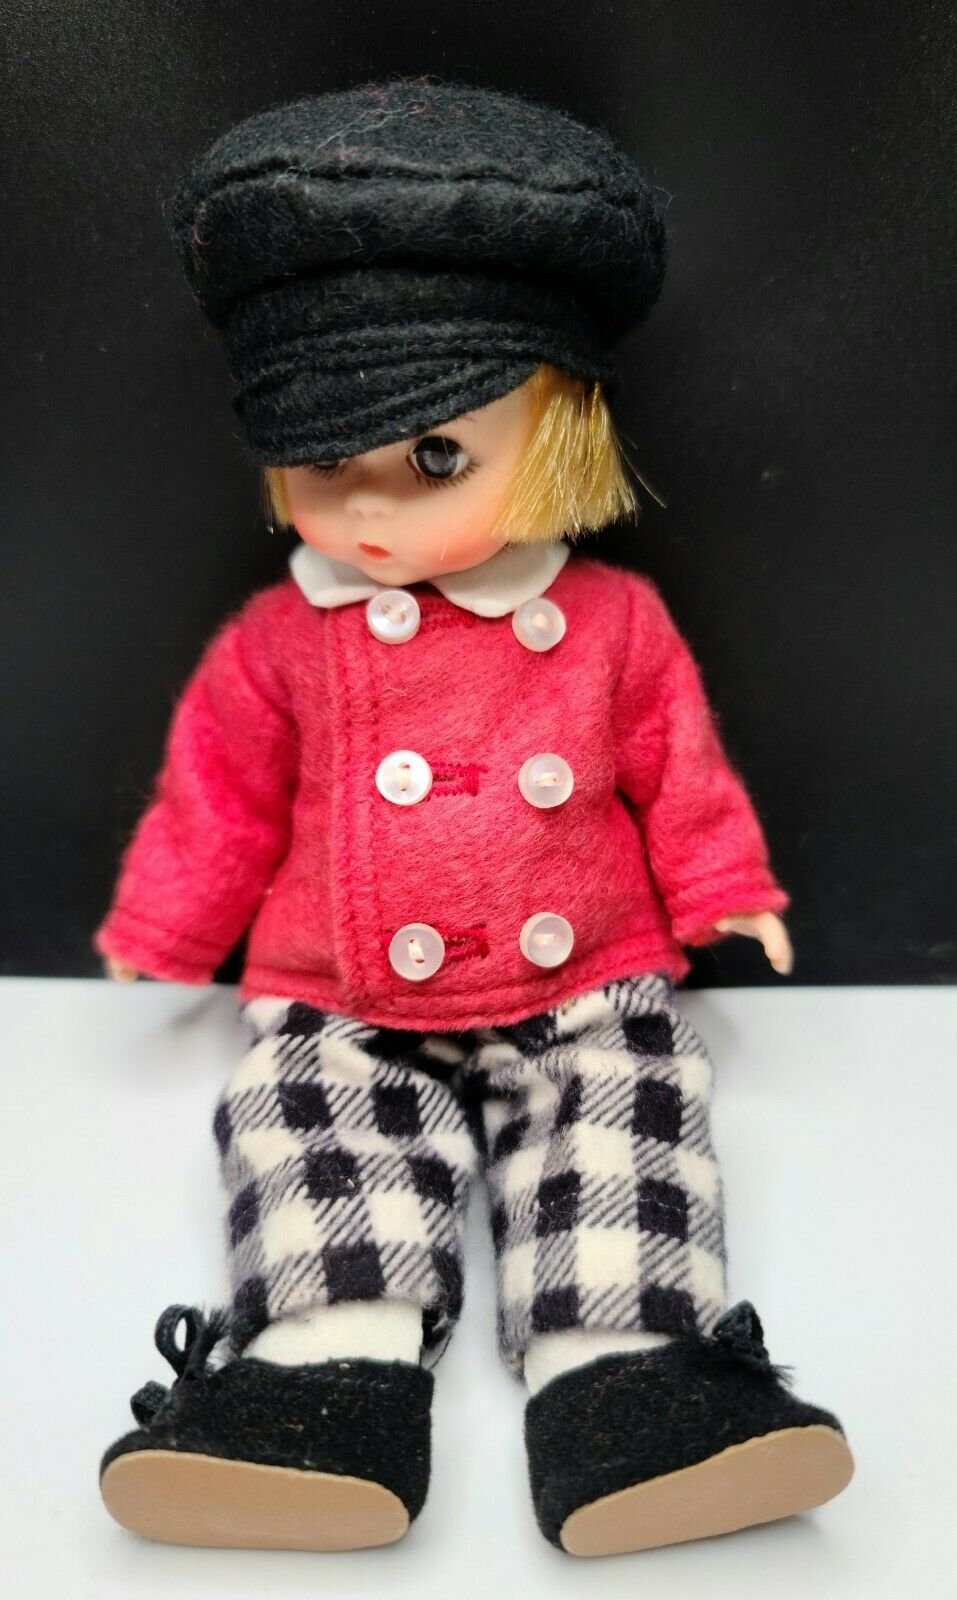 Tommy Snooks Madame Alexander Vintage Collectable Boy Doll